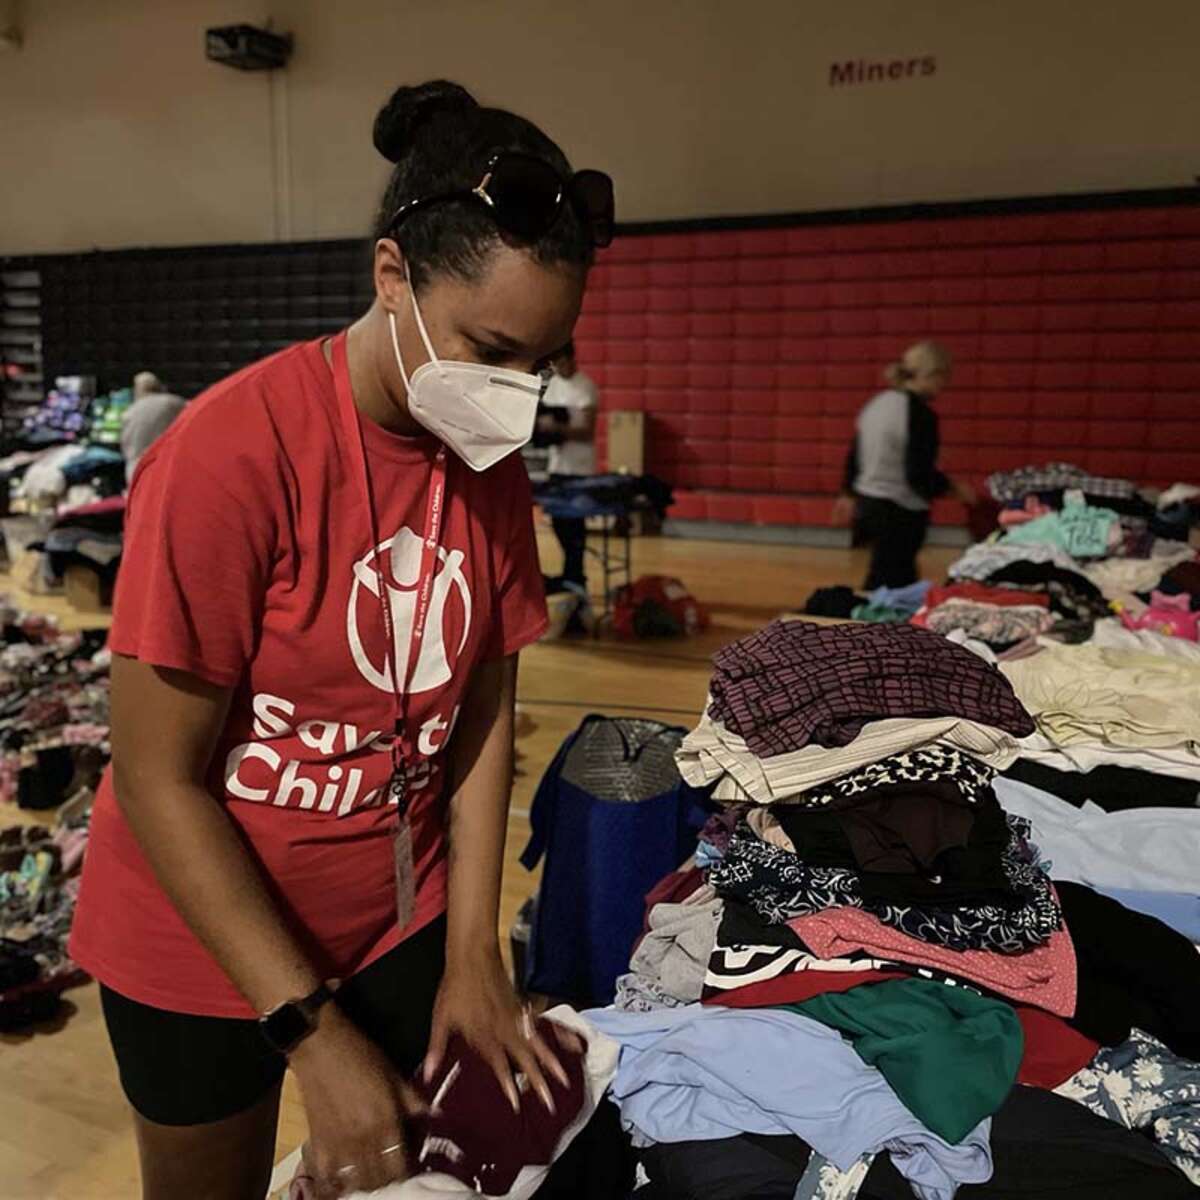  A Save the Children staff member organizes clothes for distribution to families affected by the historic flooding in Eastern Kentucky.